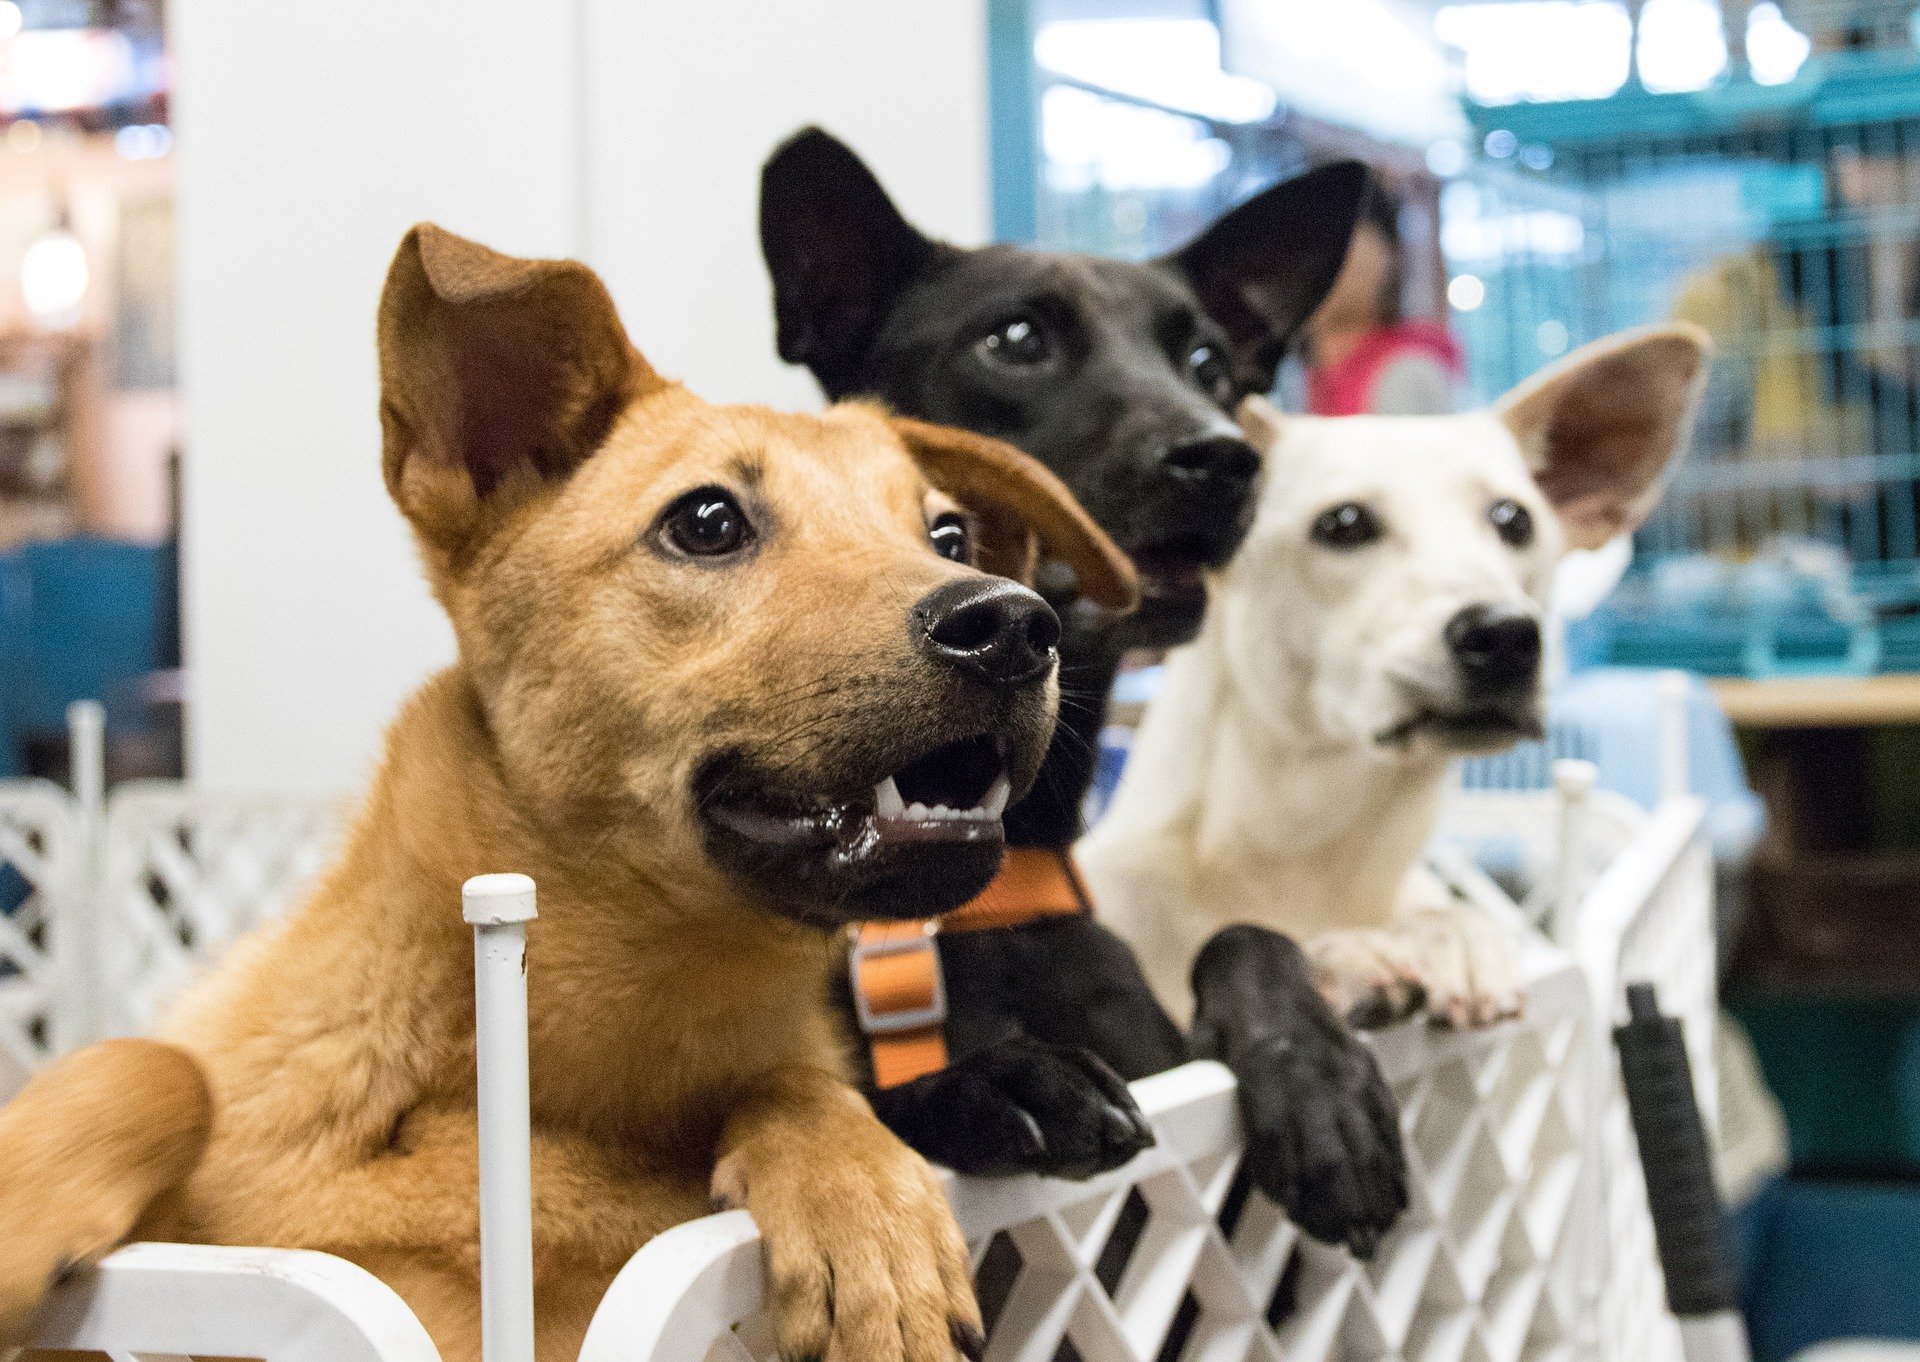 Three dogs waiting to be adopted